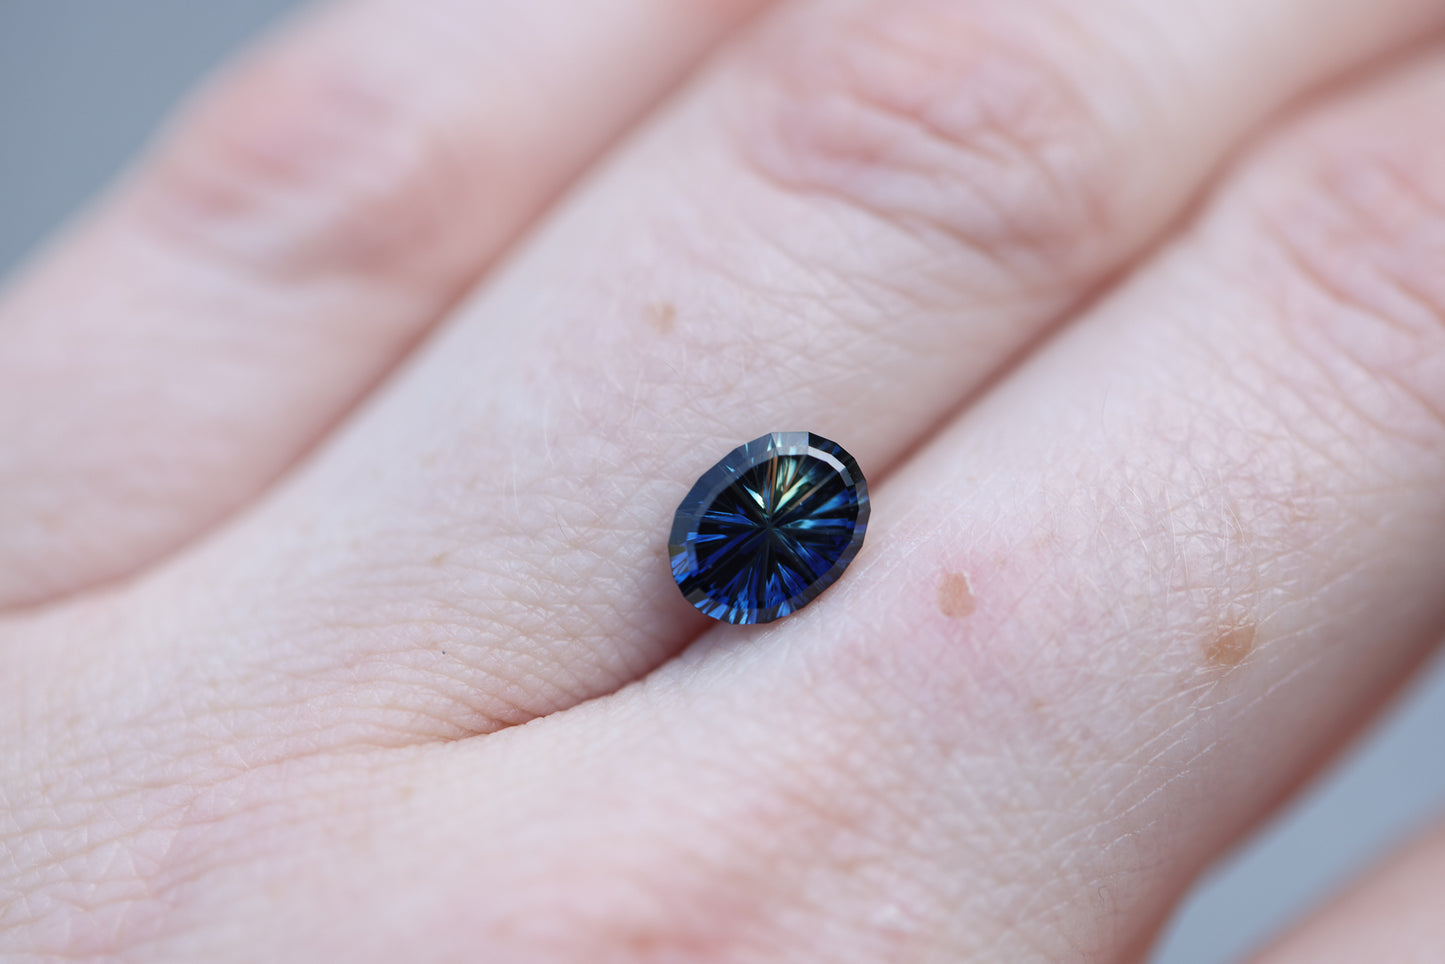 Load image into Gallery viewer, 1.68ct oval blue yellow parti sapphire- Starbrite cut by John Dyer
